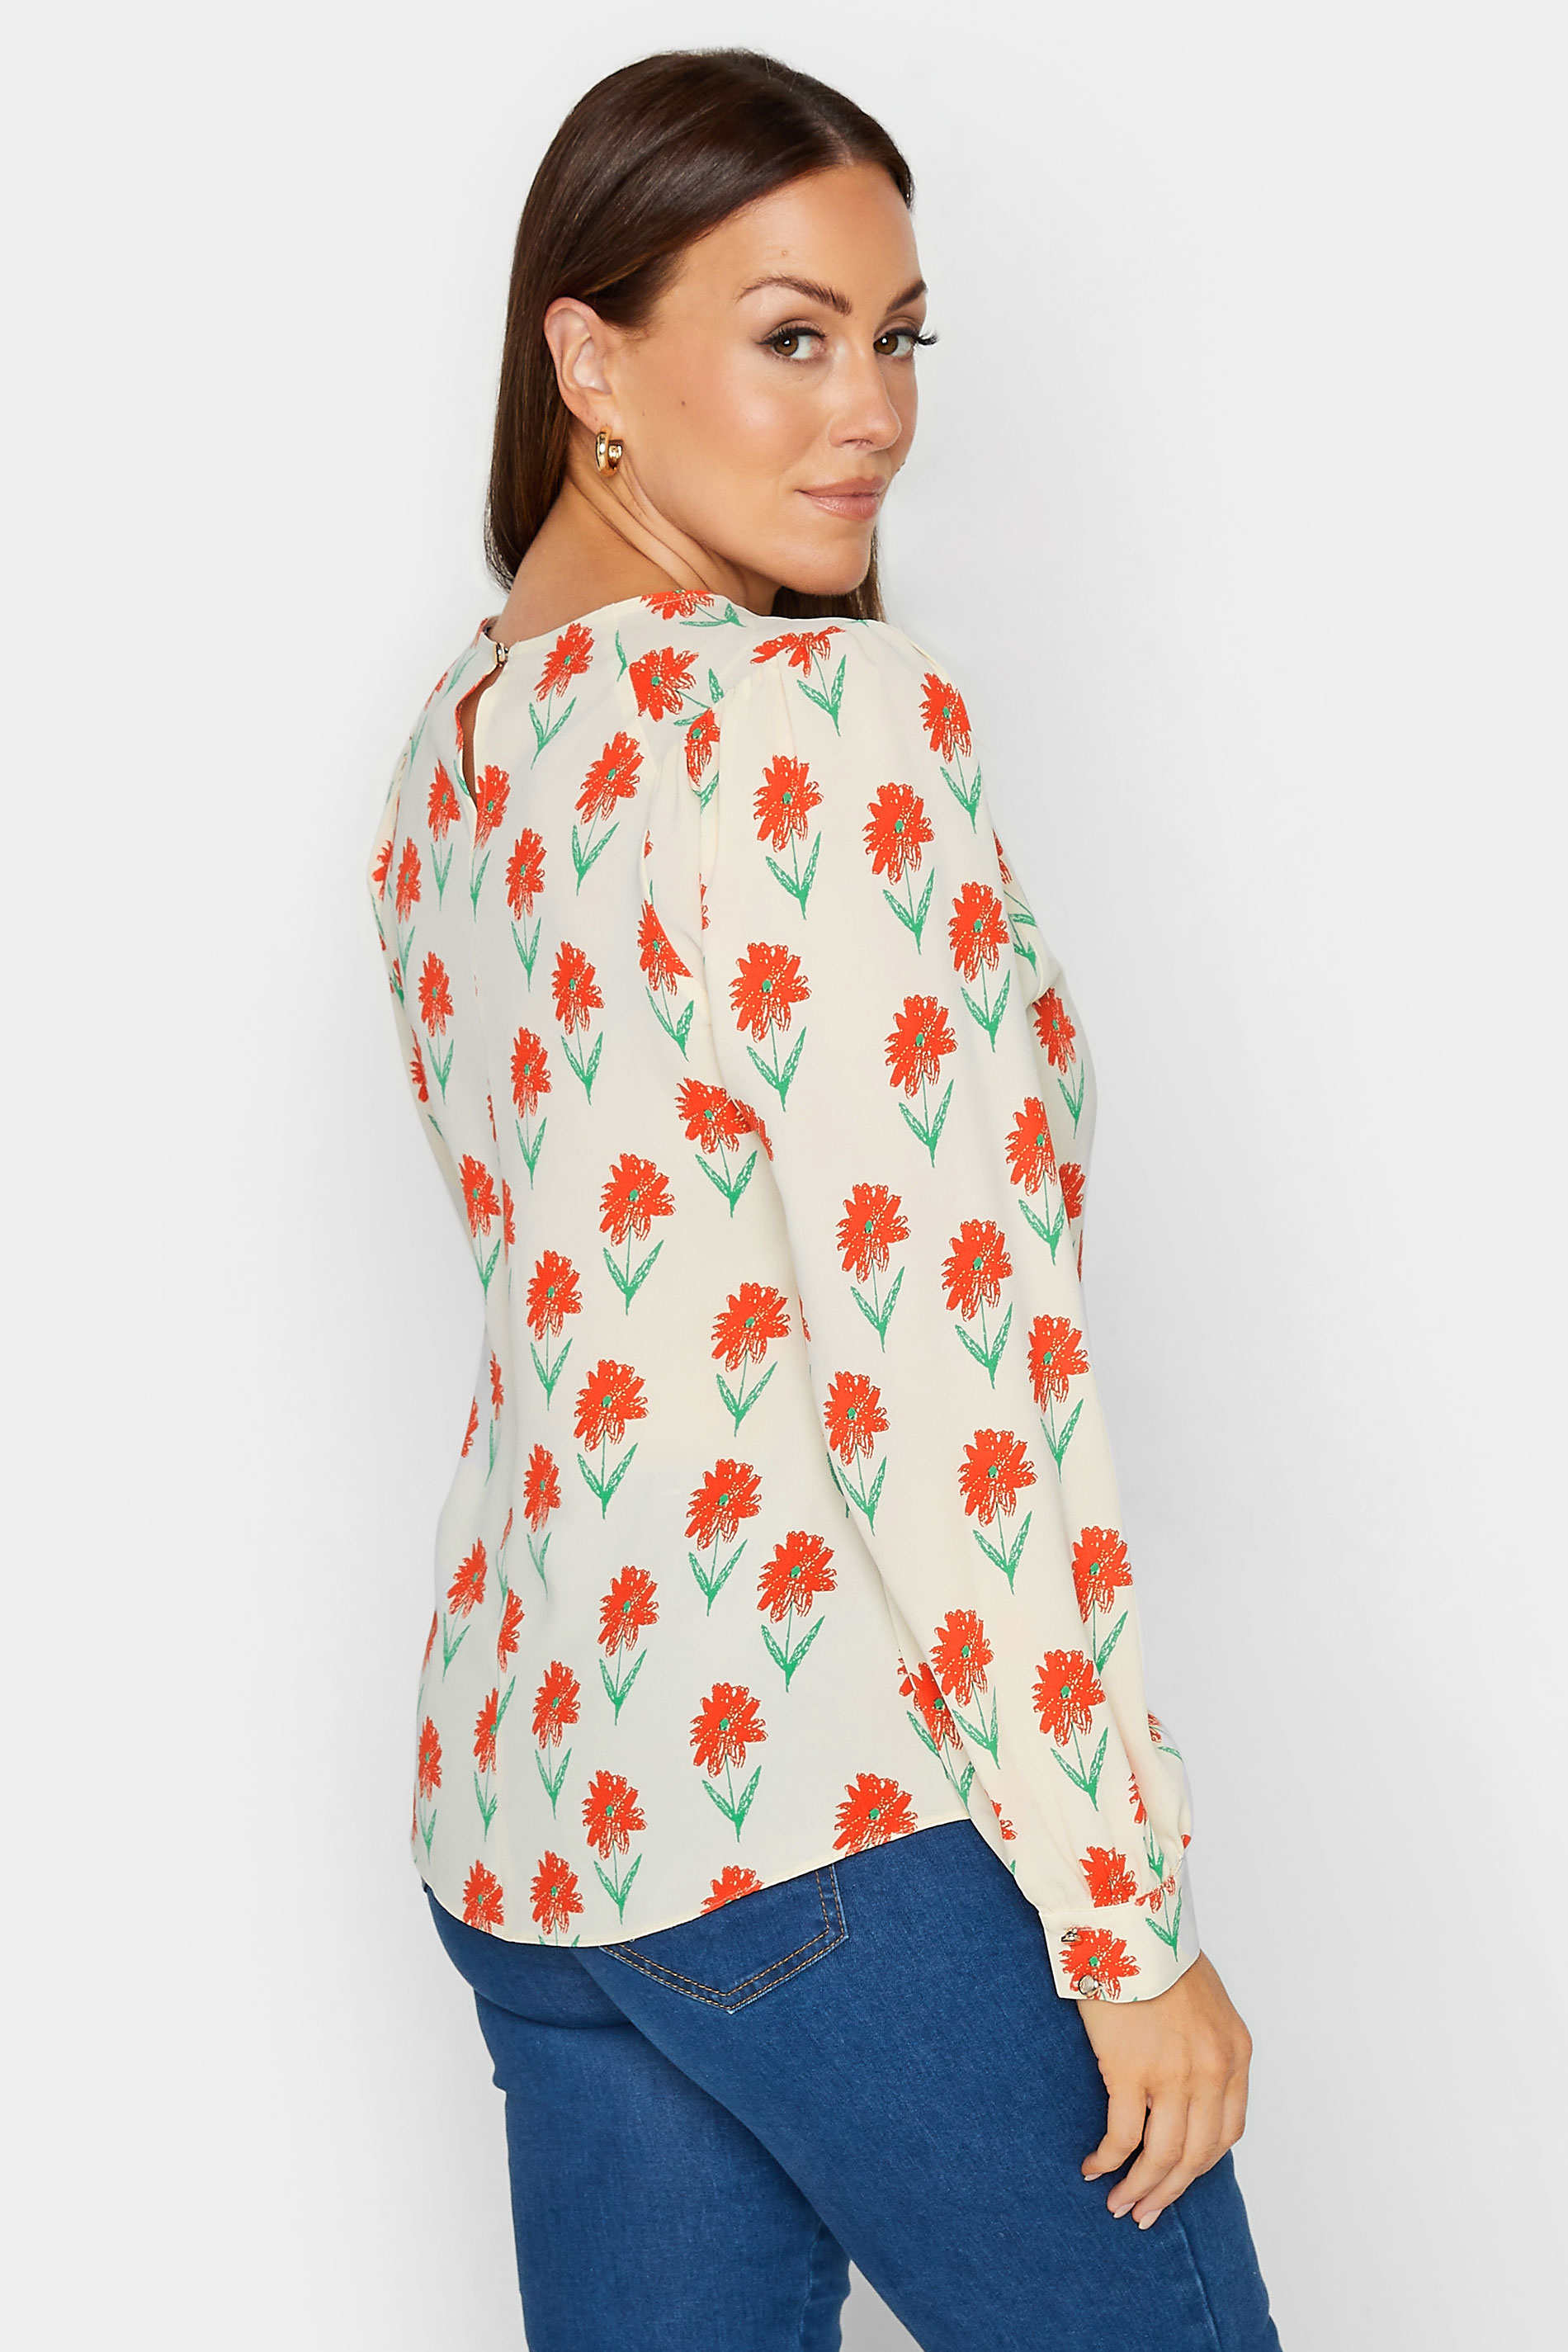 M&Co Ivory White Floral Print Long Sleeve Blouse | M&Co 3